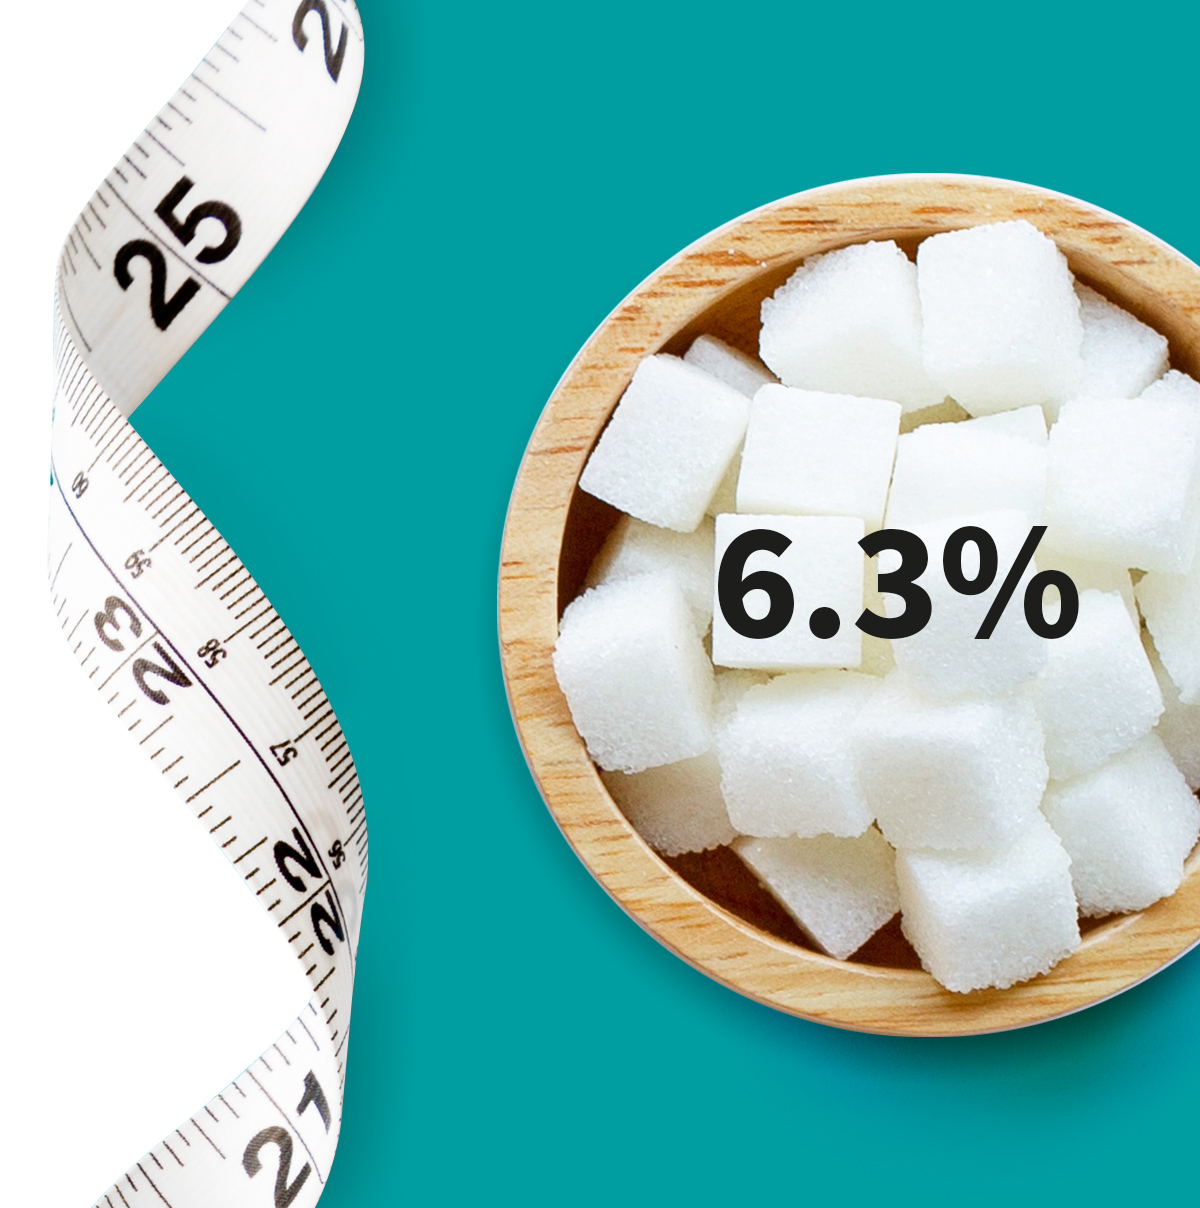 [.PL-pl Poland (polish)] •	A measuring tape and a bowl full of sugar cubes shown as a metaphor for diabetes